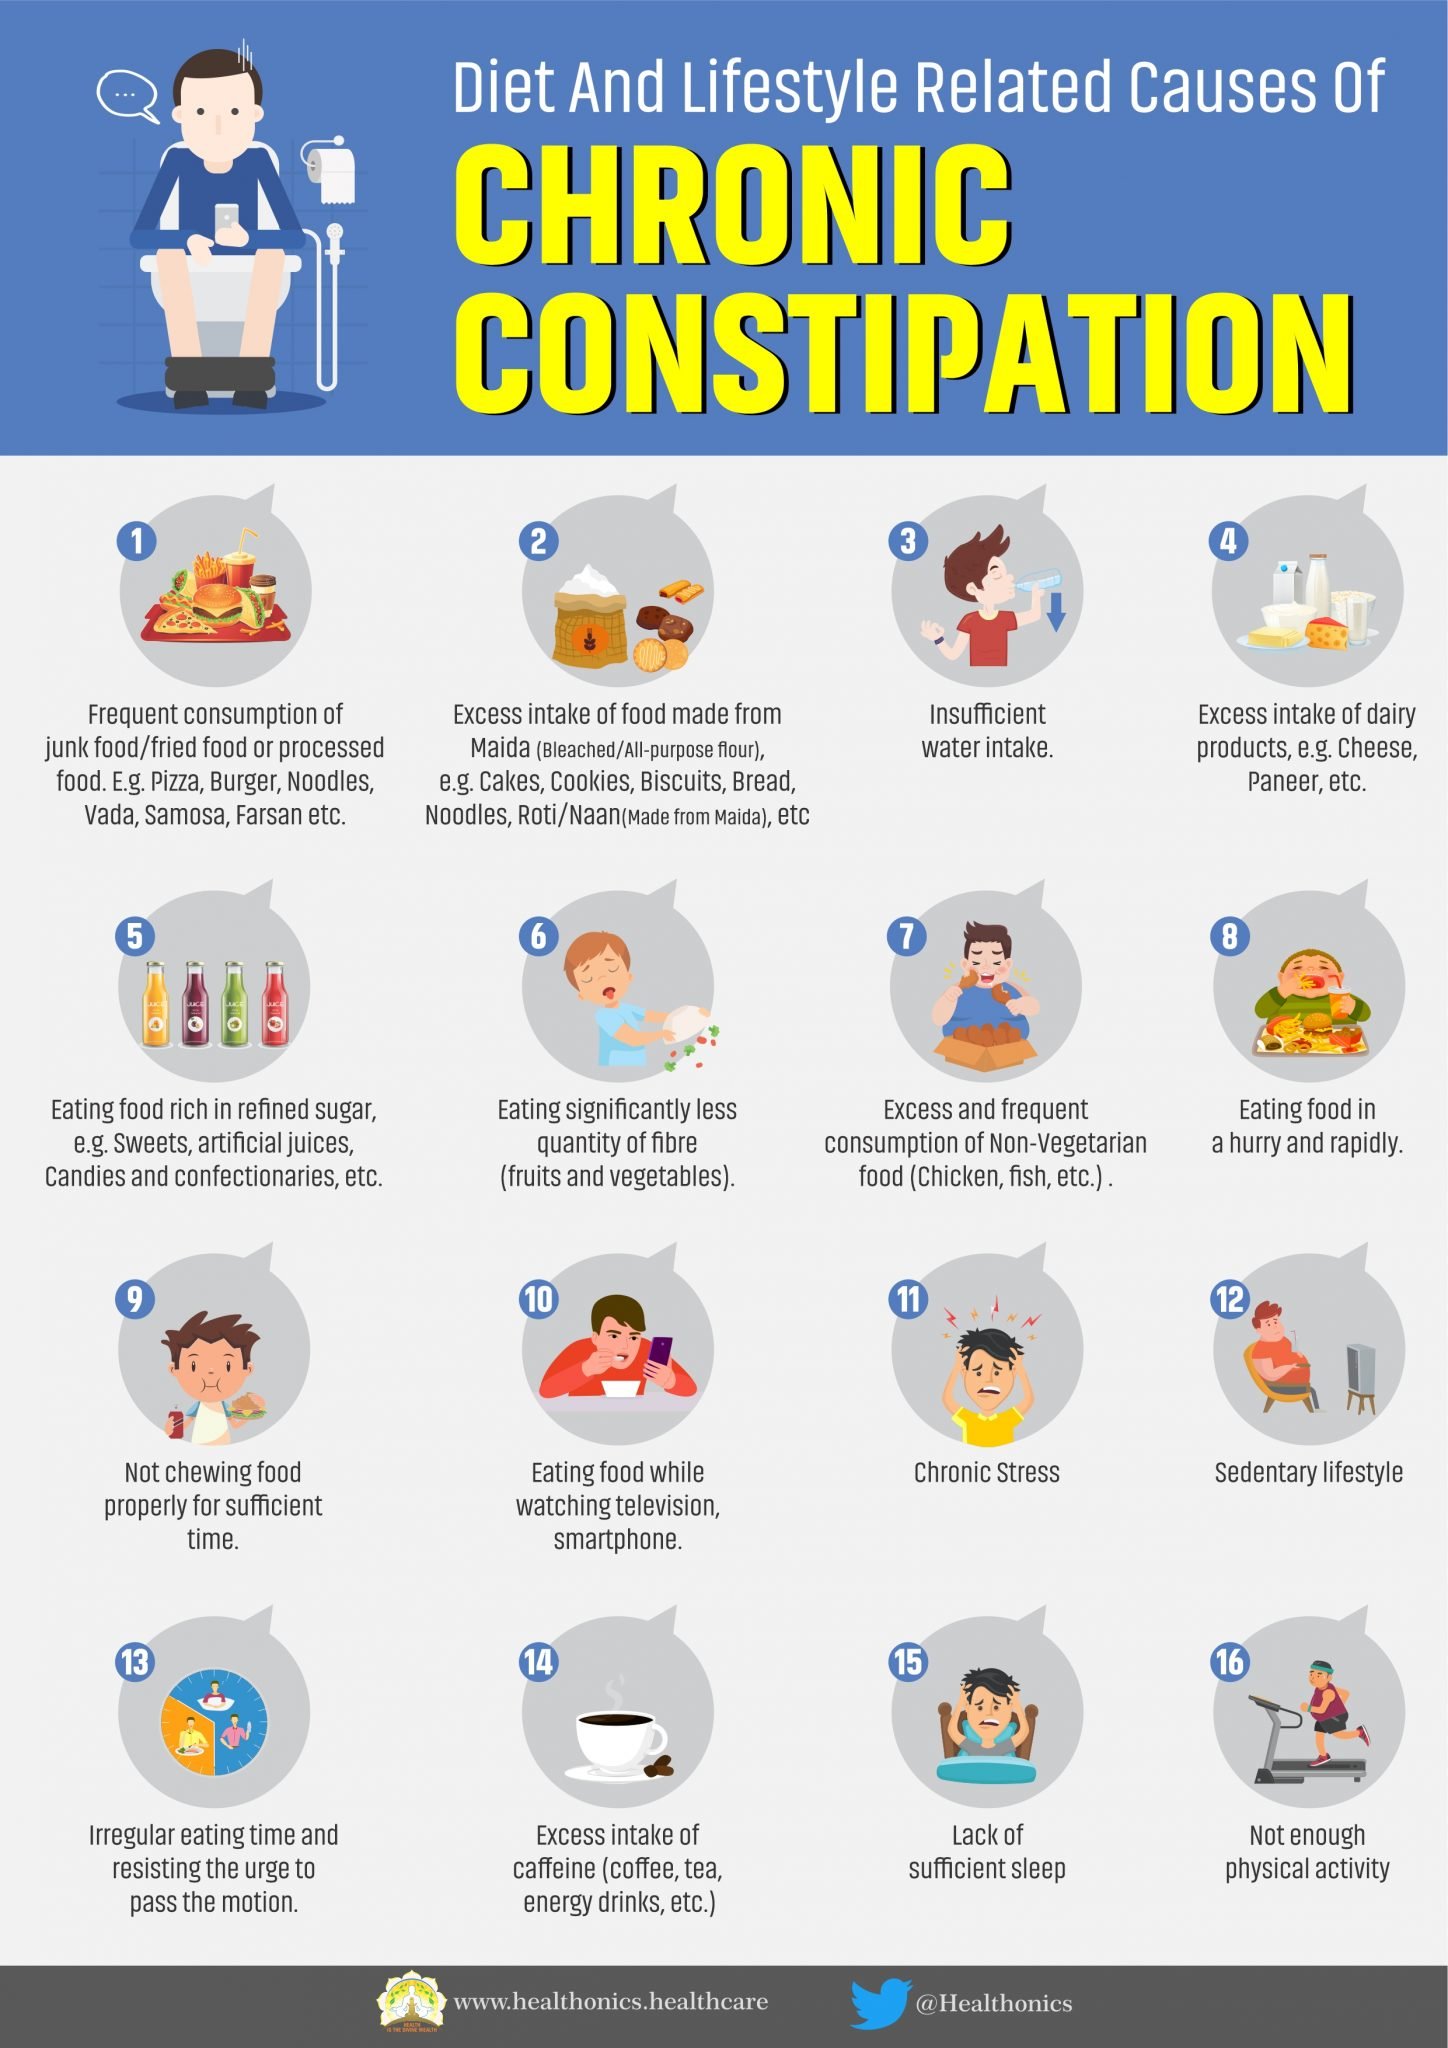 TIPS TO PREVENT CHRONIC CONSTIPATION